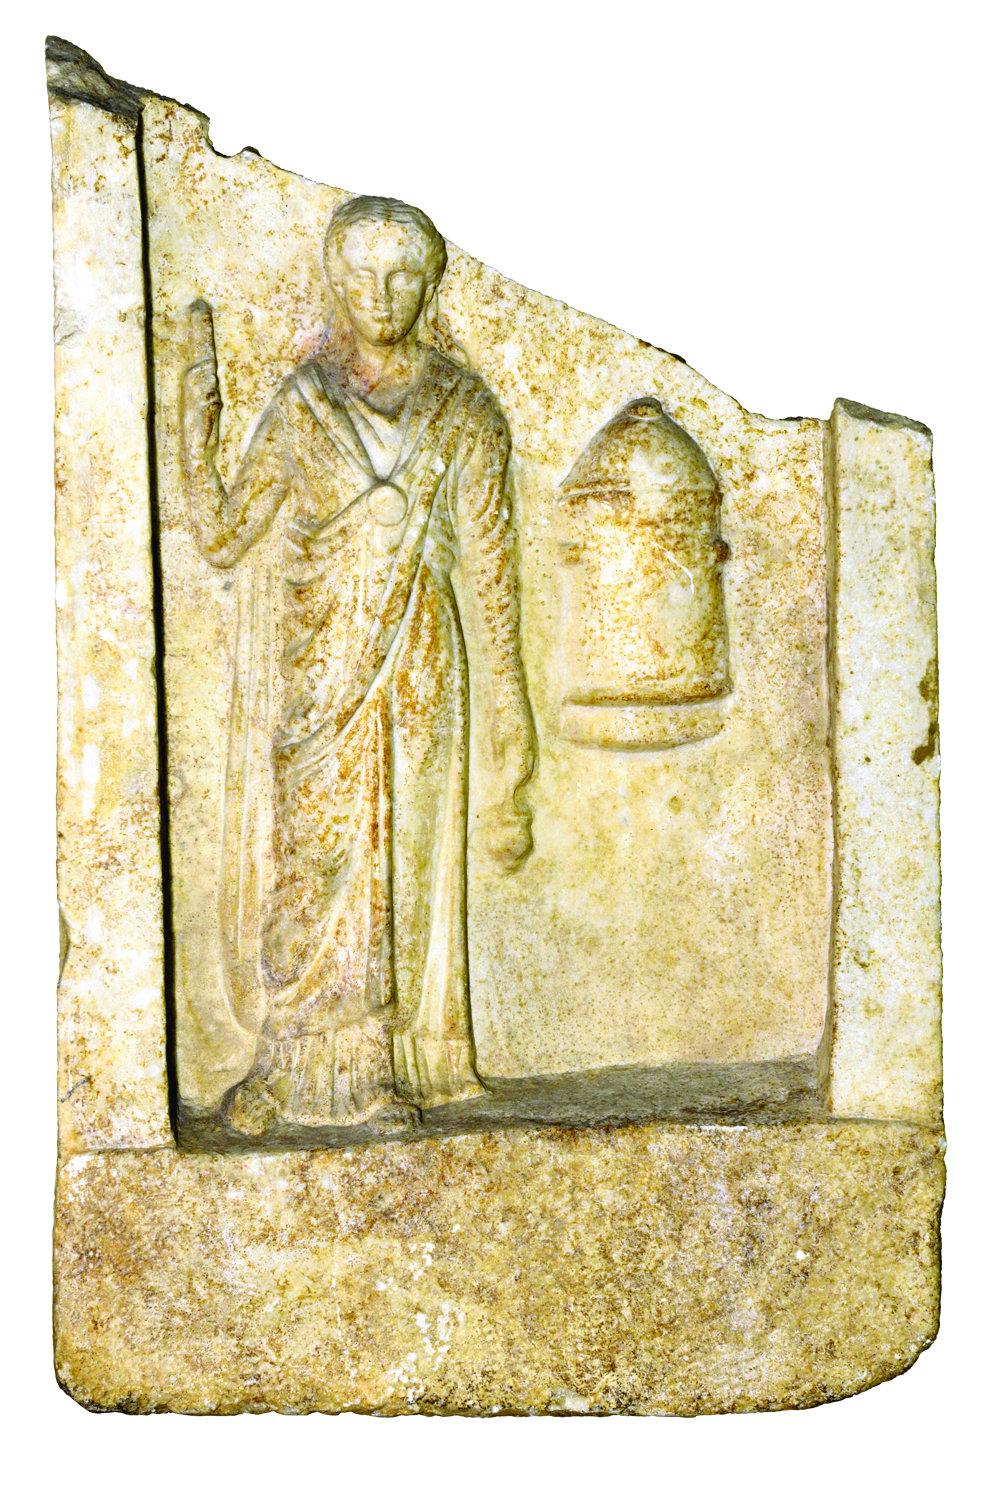 3- The offering stela with the relief of goddess Isis which shows the Egyptian in uence on Byzantium (Marble, Kanlıca, Roman period, 2<sup>nd</sup> century CE) (Istanbul Archeology Museum)